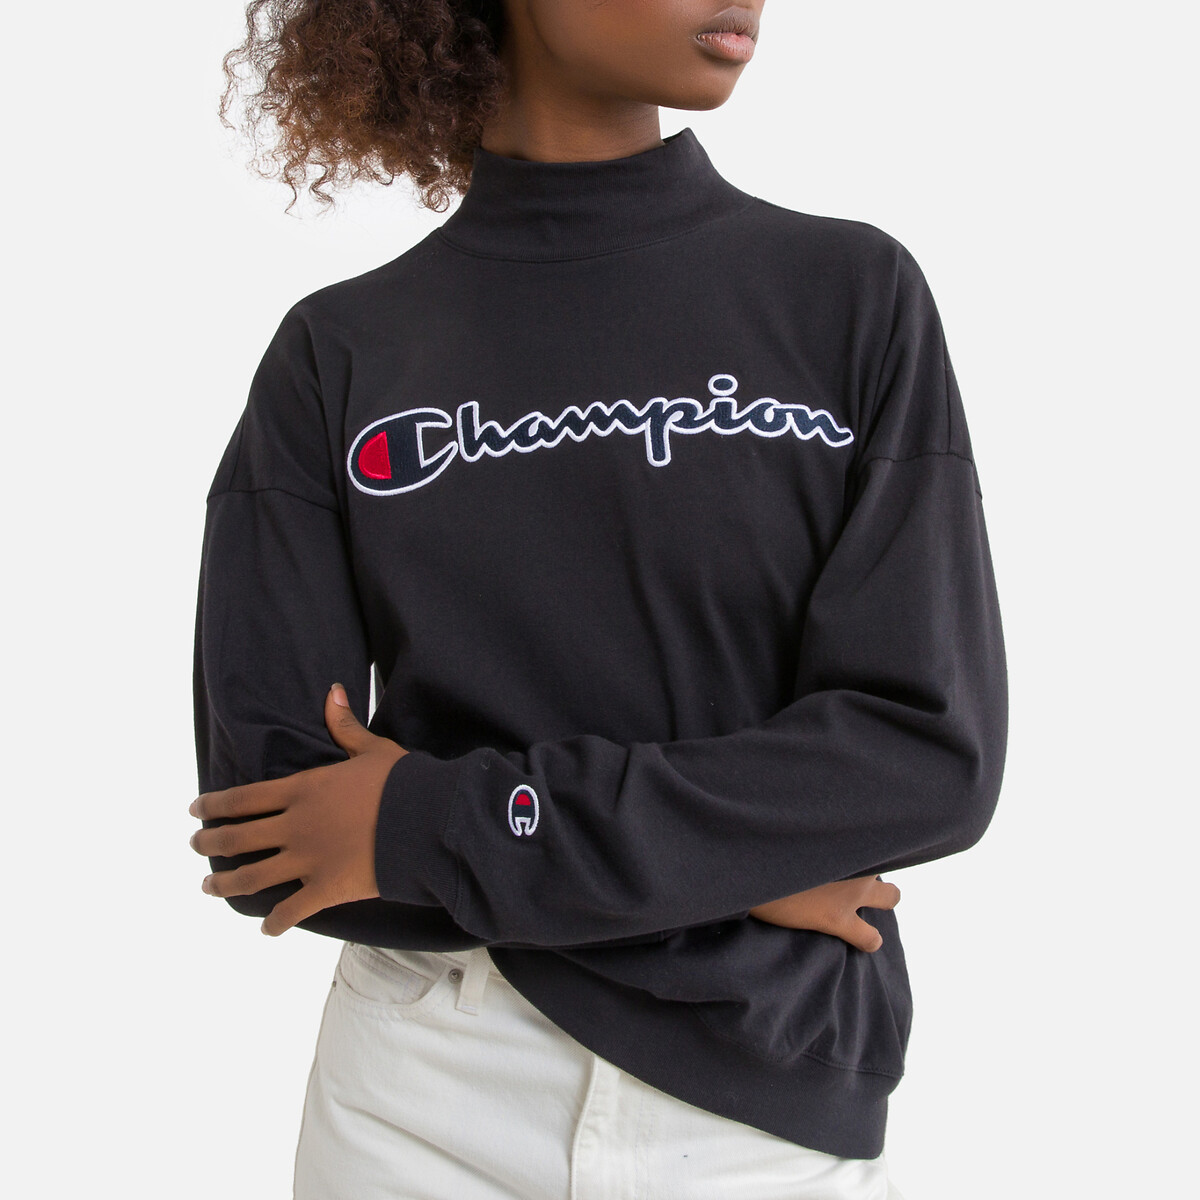 champion t shirt embroidered